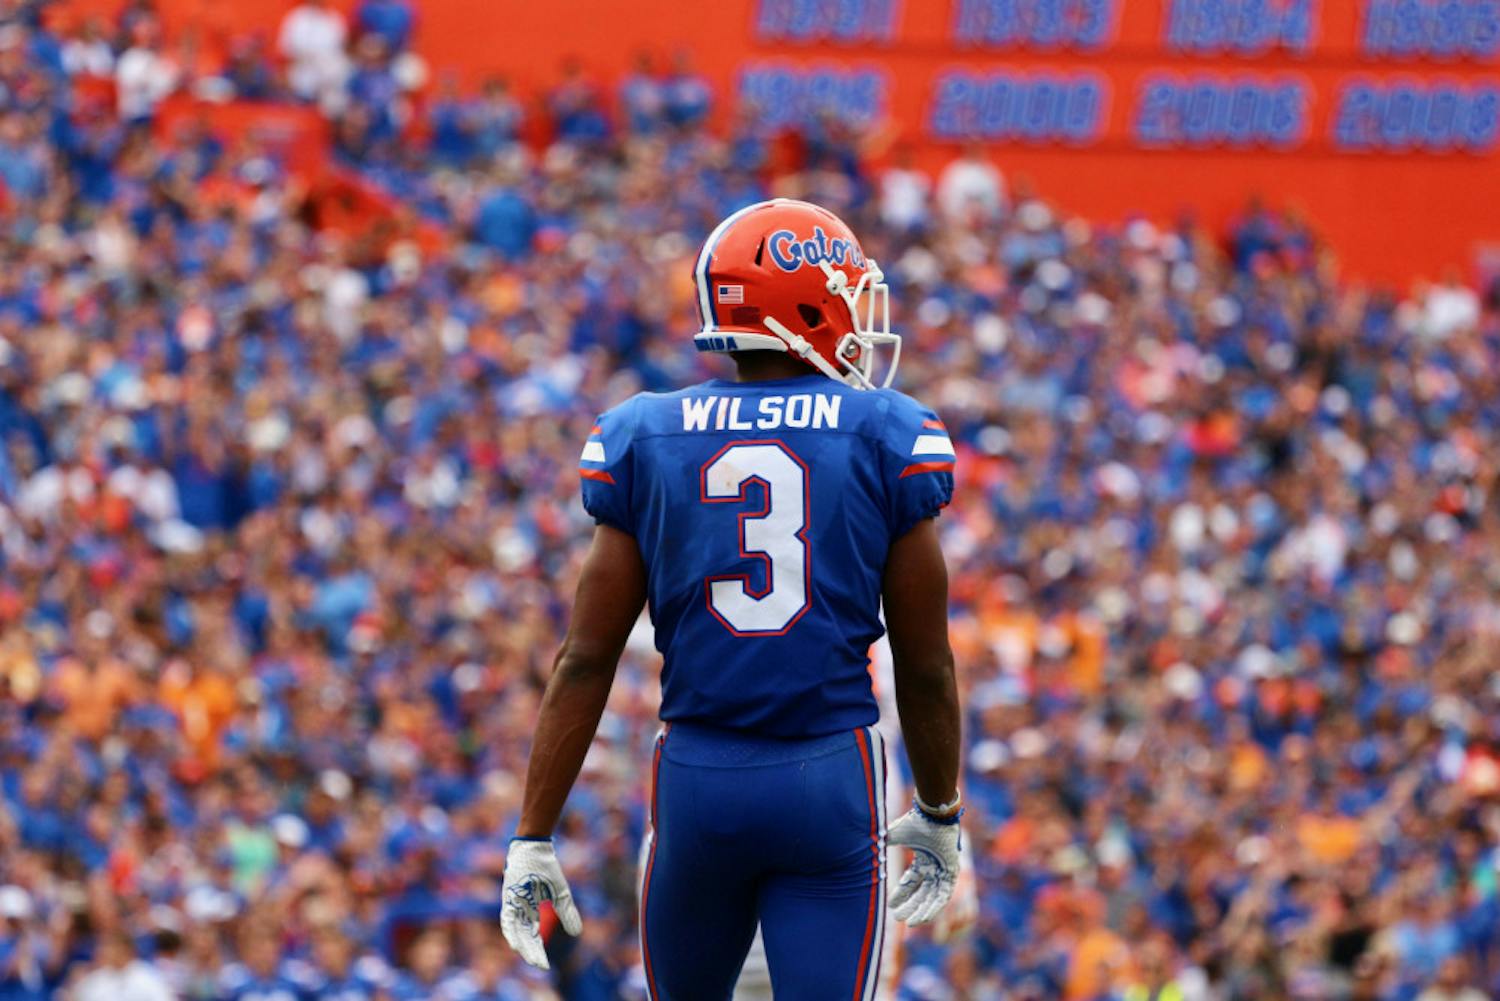 UF cornerback Marco Wilson stands on the field at Ben Hill Griffin Stadium in 2017.